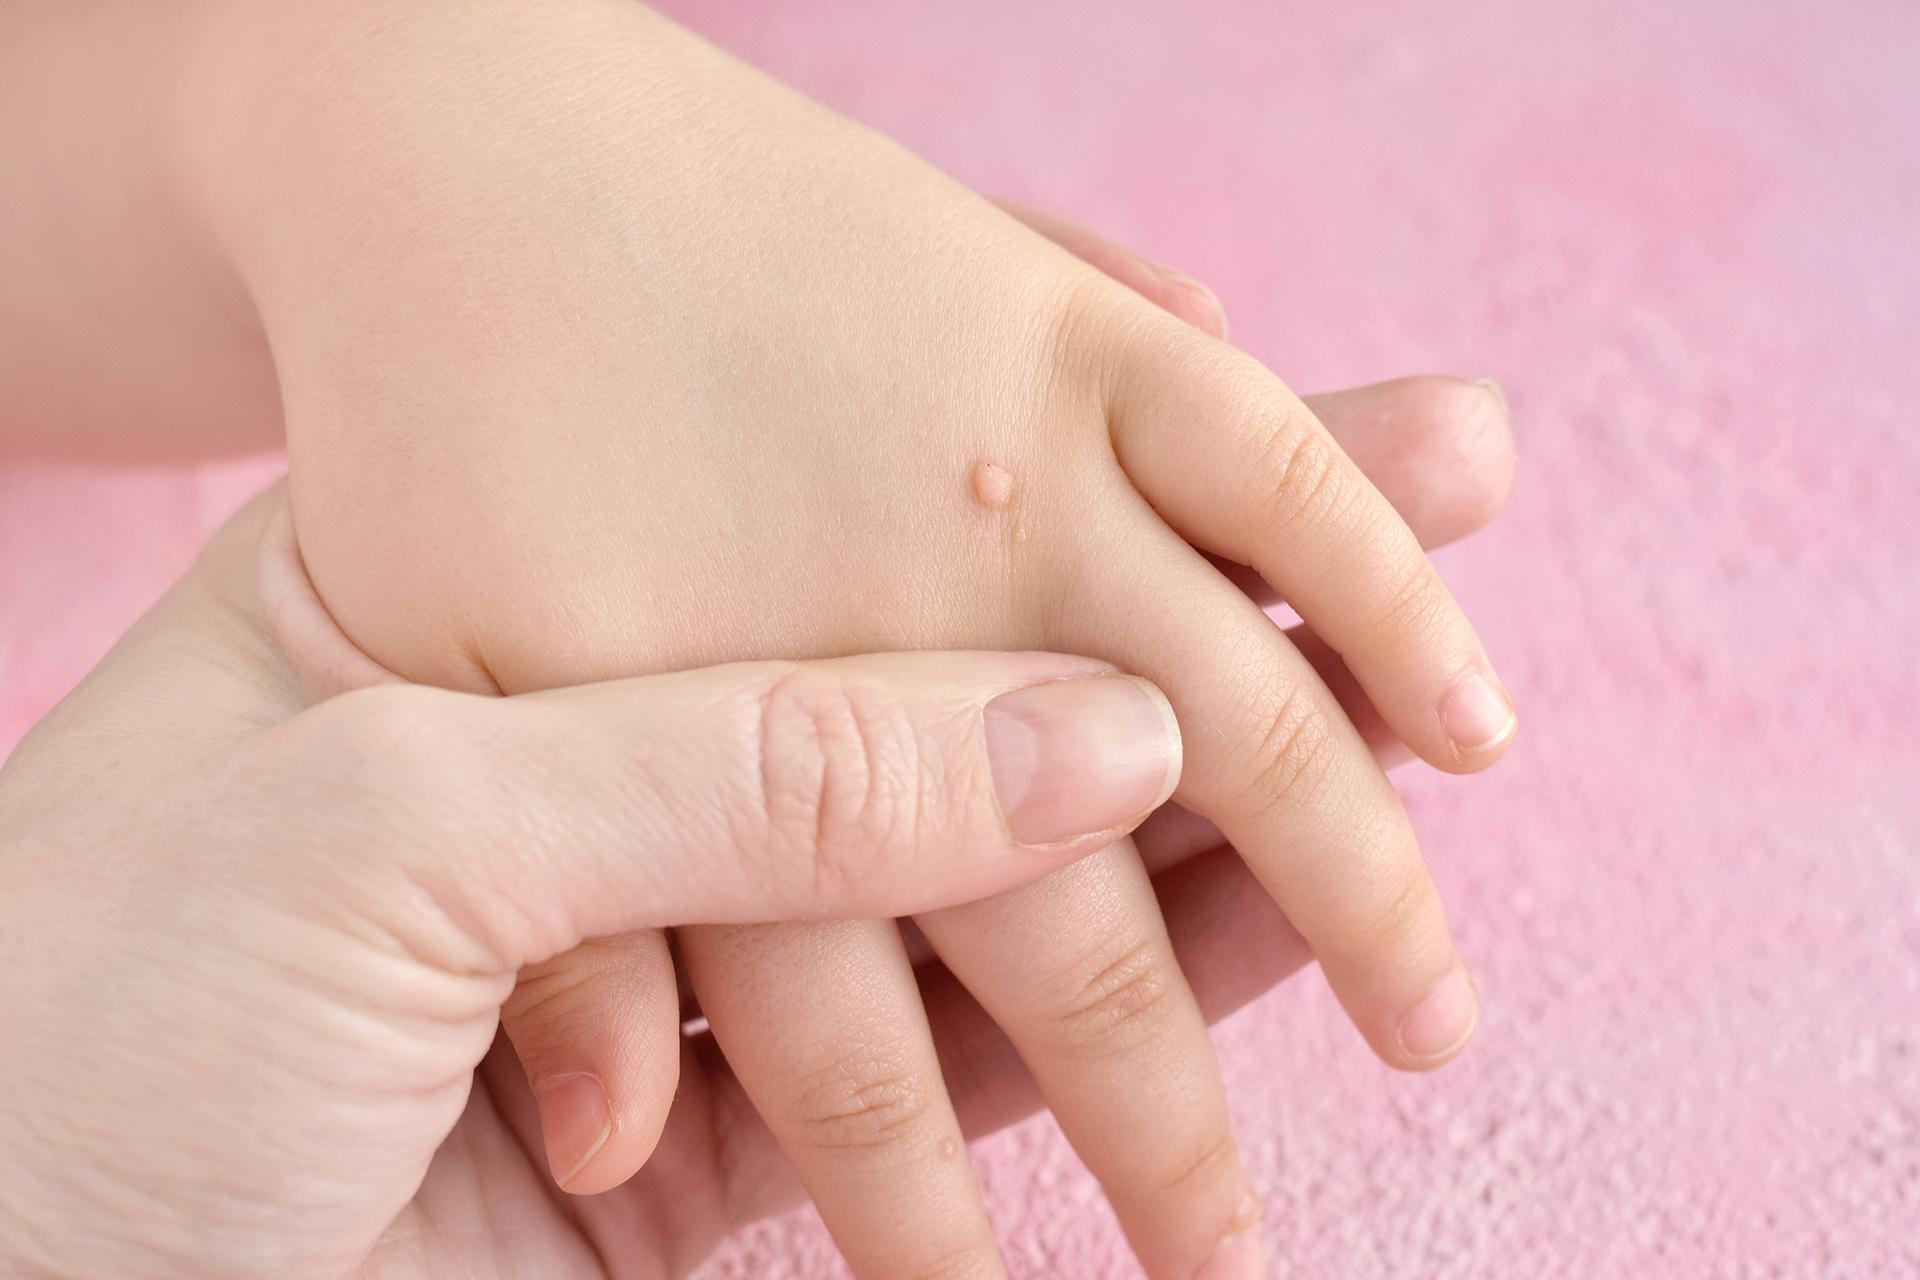 Warts Treatment: Top 4 Wart Removal Home Remedies To Try